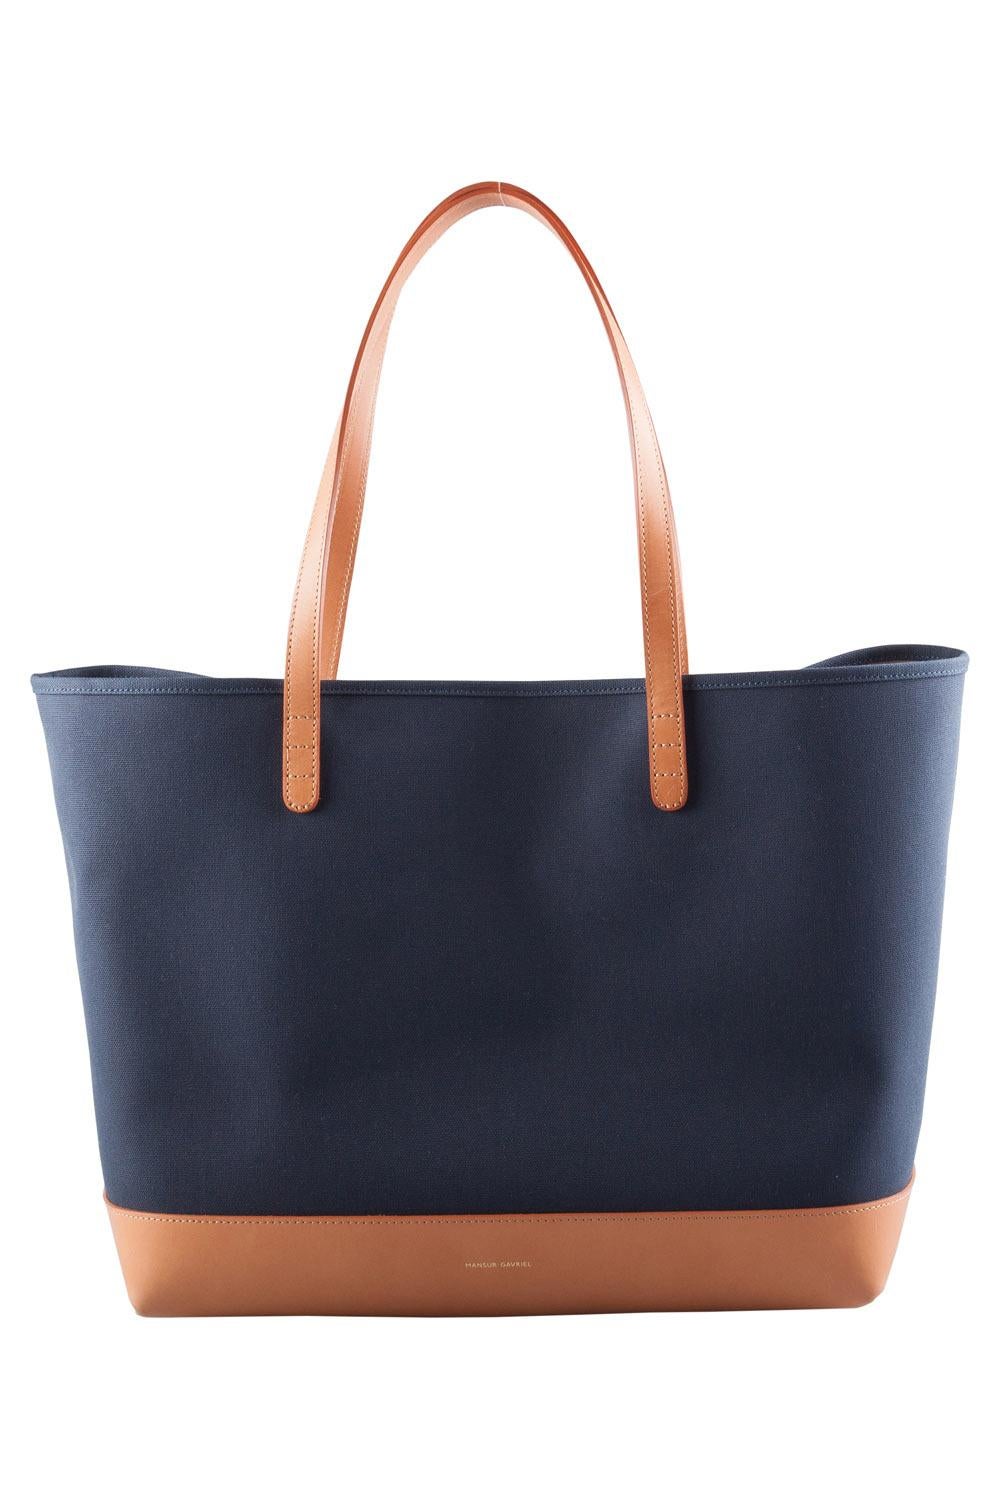 Crafted by Mansur Gavriel, this canvas and leather tote is designed in the dual tones of blue and cream. The bag features a wide interior lined from fabric and leather. It can easily house more than just your essentials. This accessory comes with